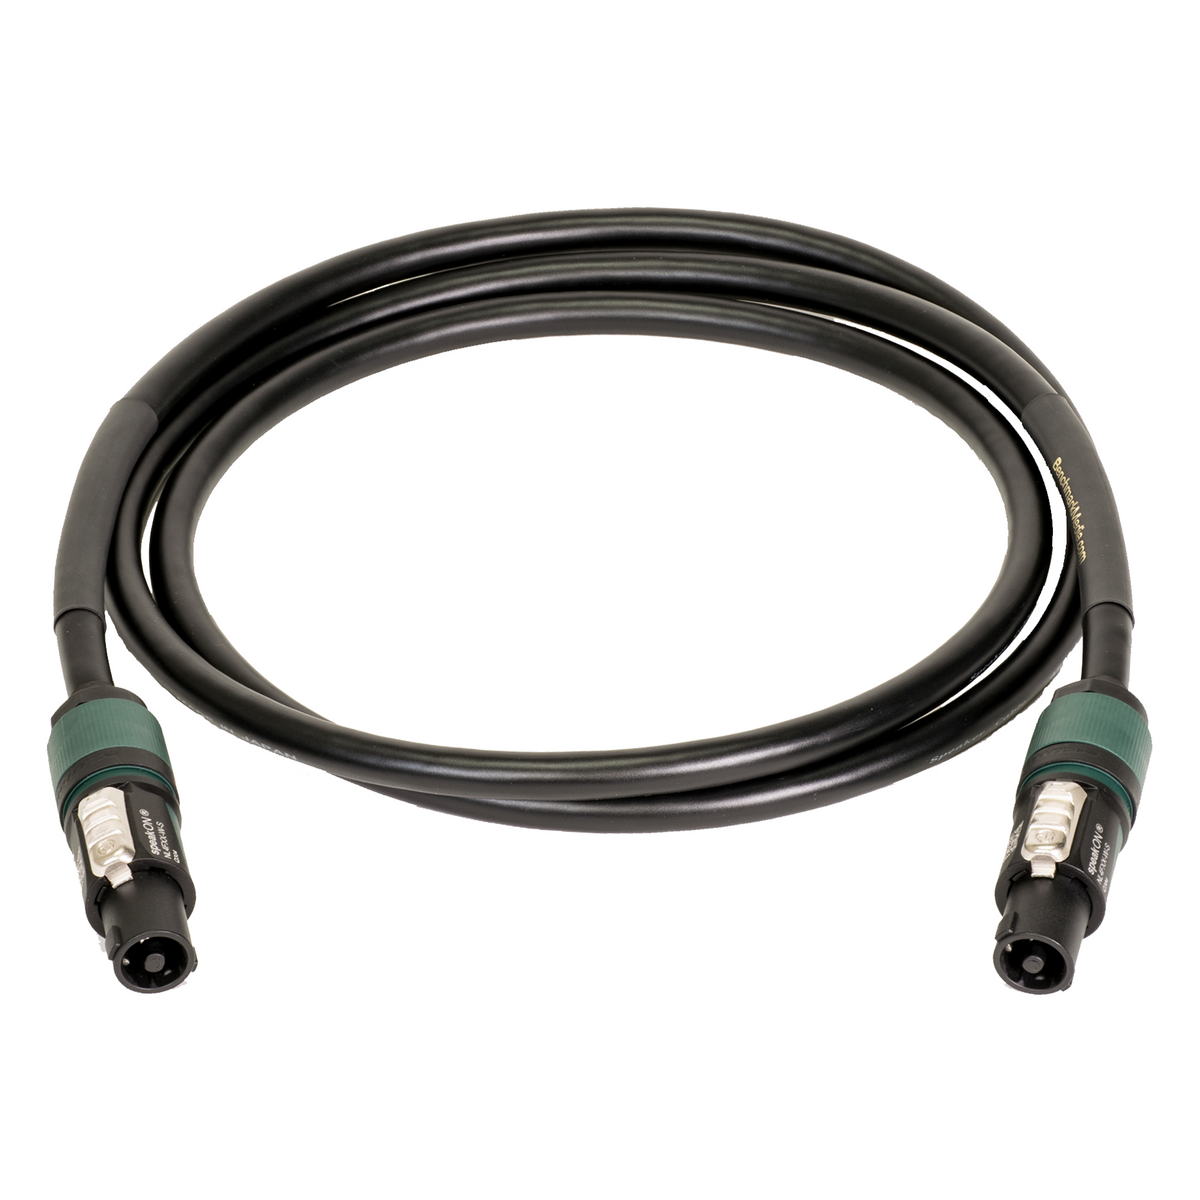 Benchmark 4-Pole NL4 to NL4 speaker cable